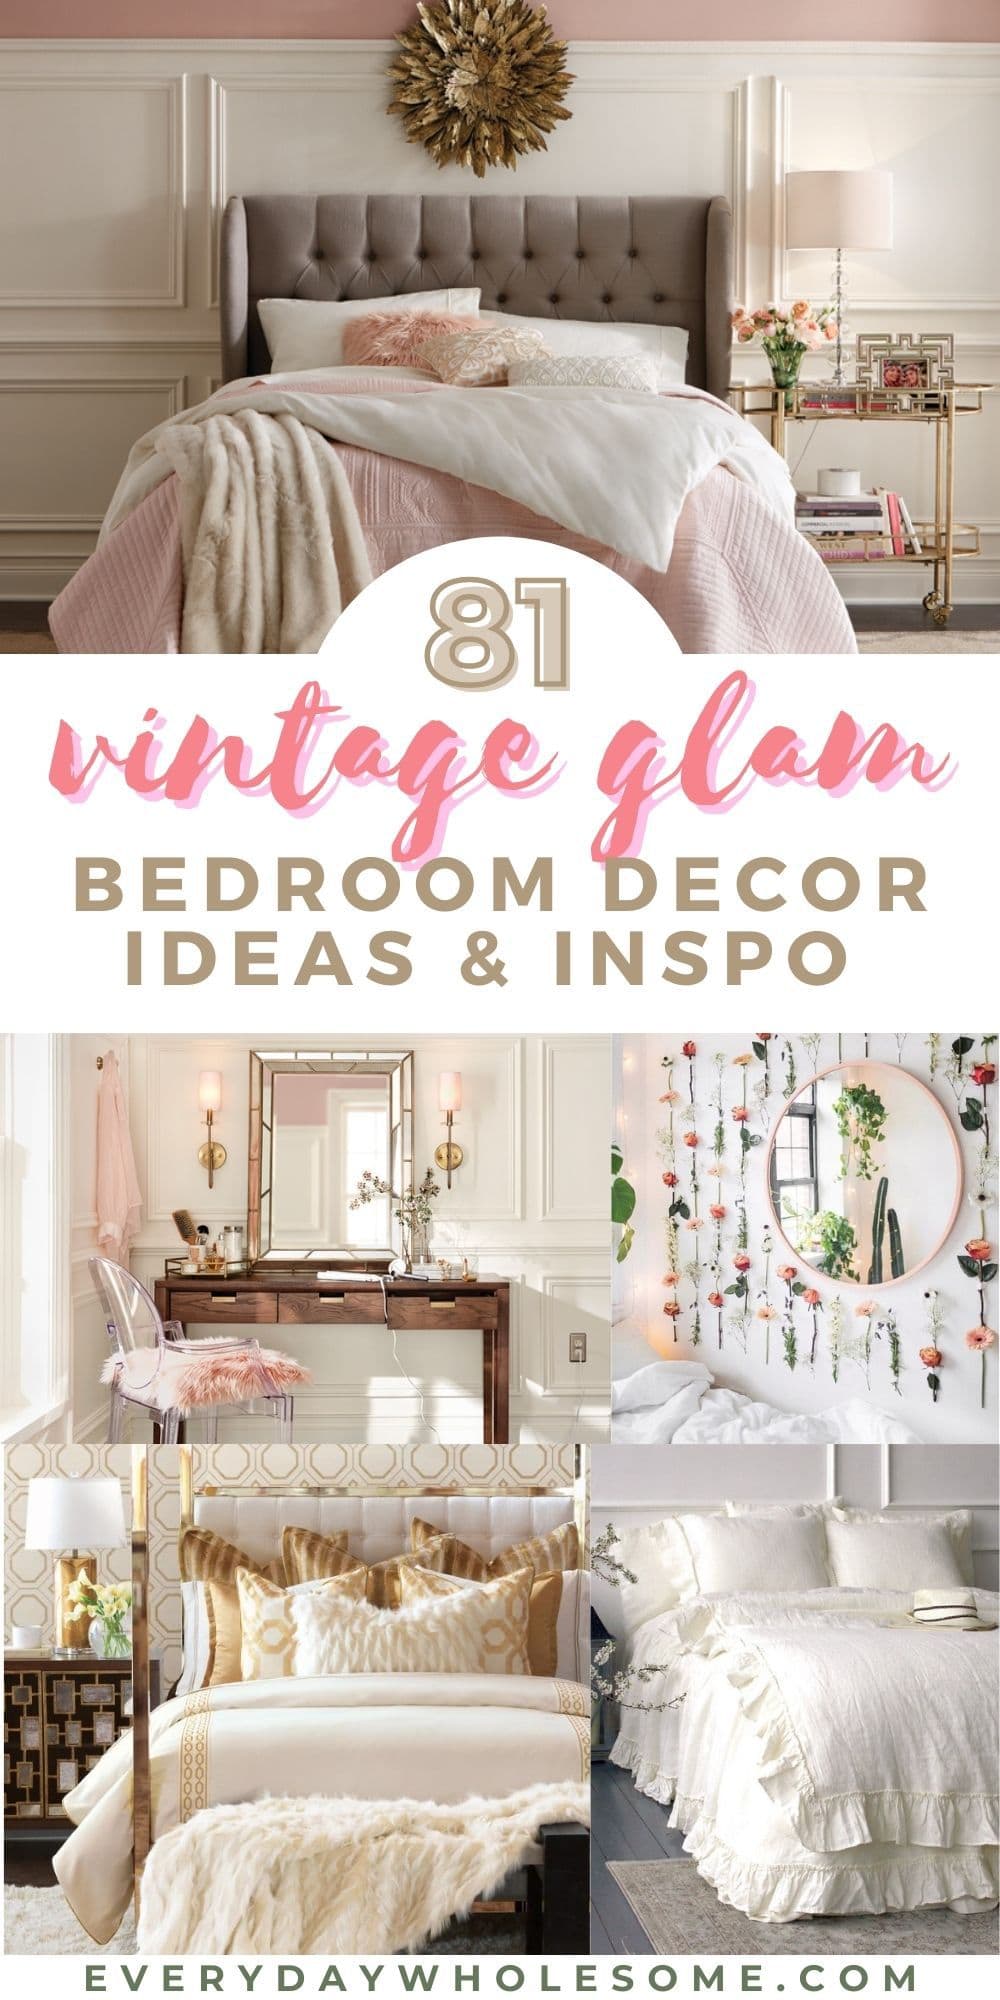 Everyday Wholesome   20 Vintage Glam Bedroom Decor Ideas & Inspiration